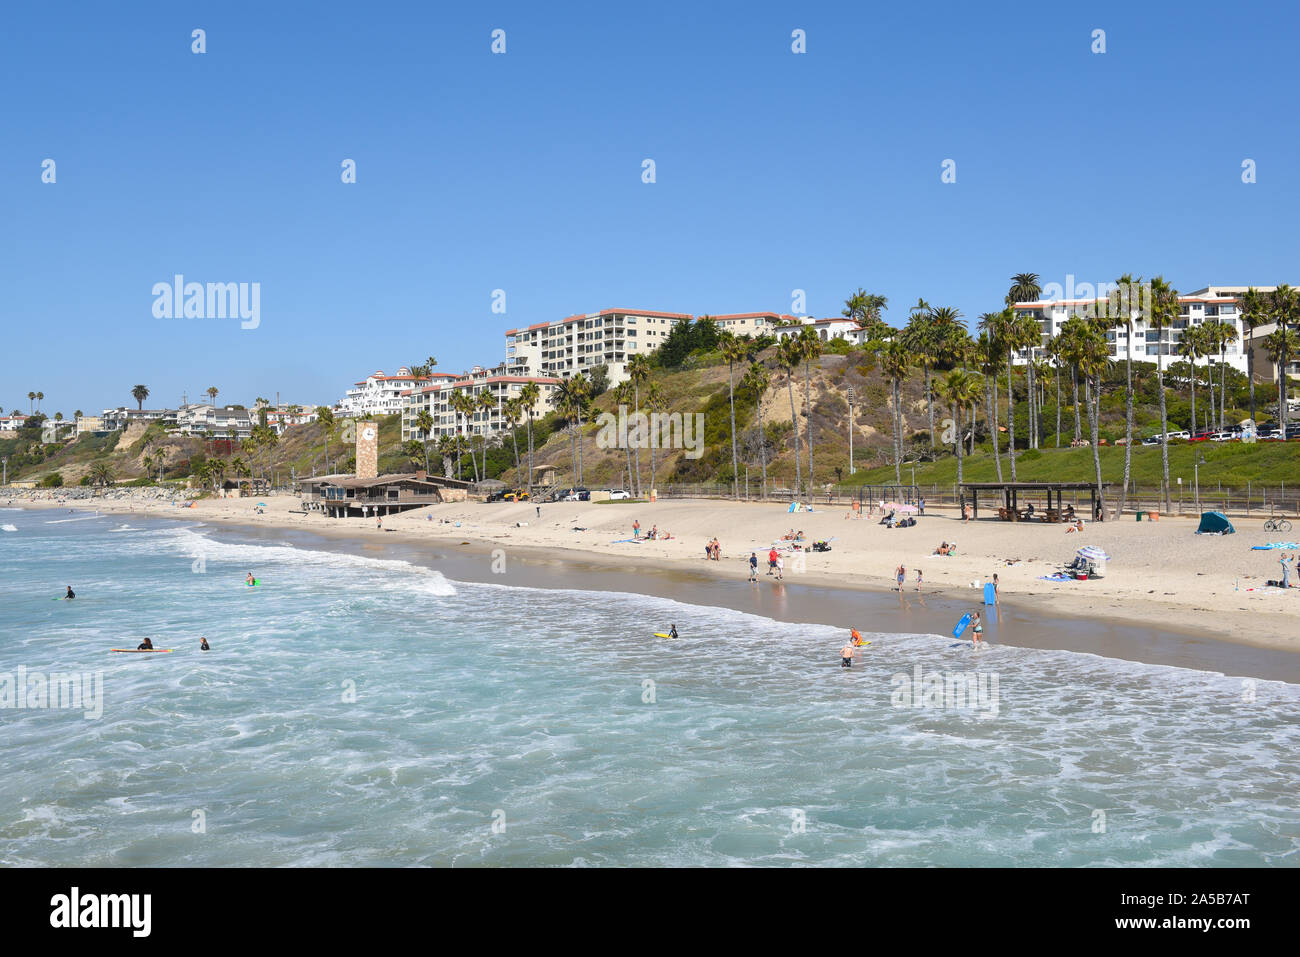 SAN CLEMENTE, CALIFORNIA - 18 OCT 2019: The beach and coastline with surfers and sunbathers seen from the pier in the South Orange County beach town. Stock Photo